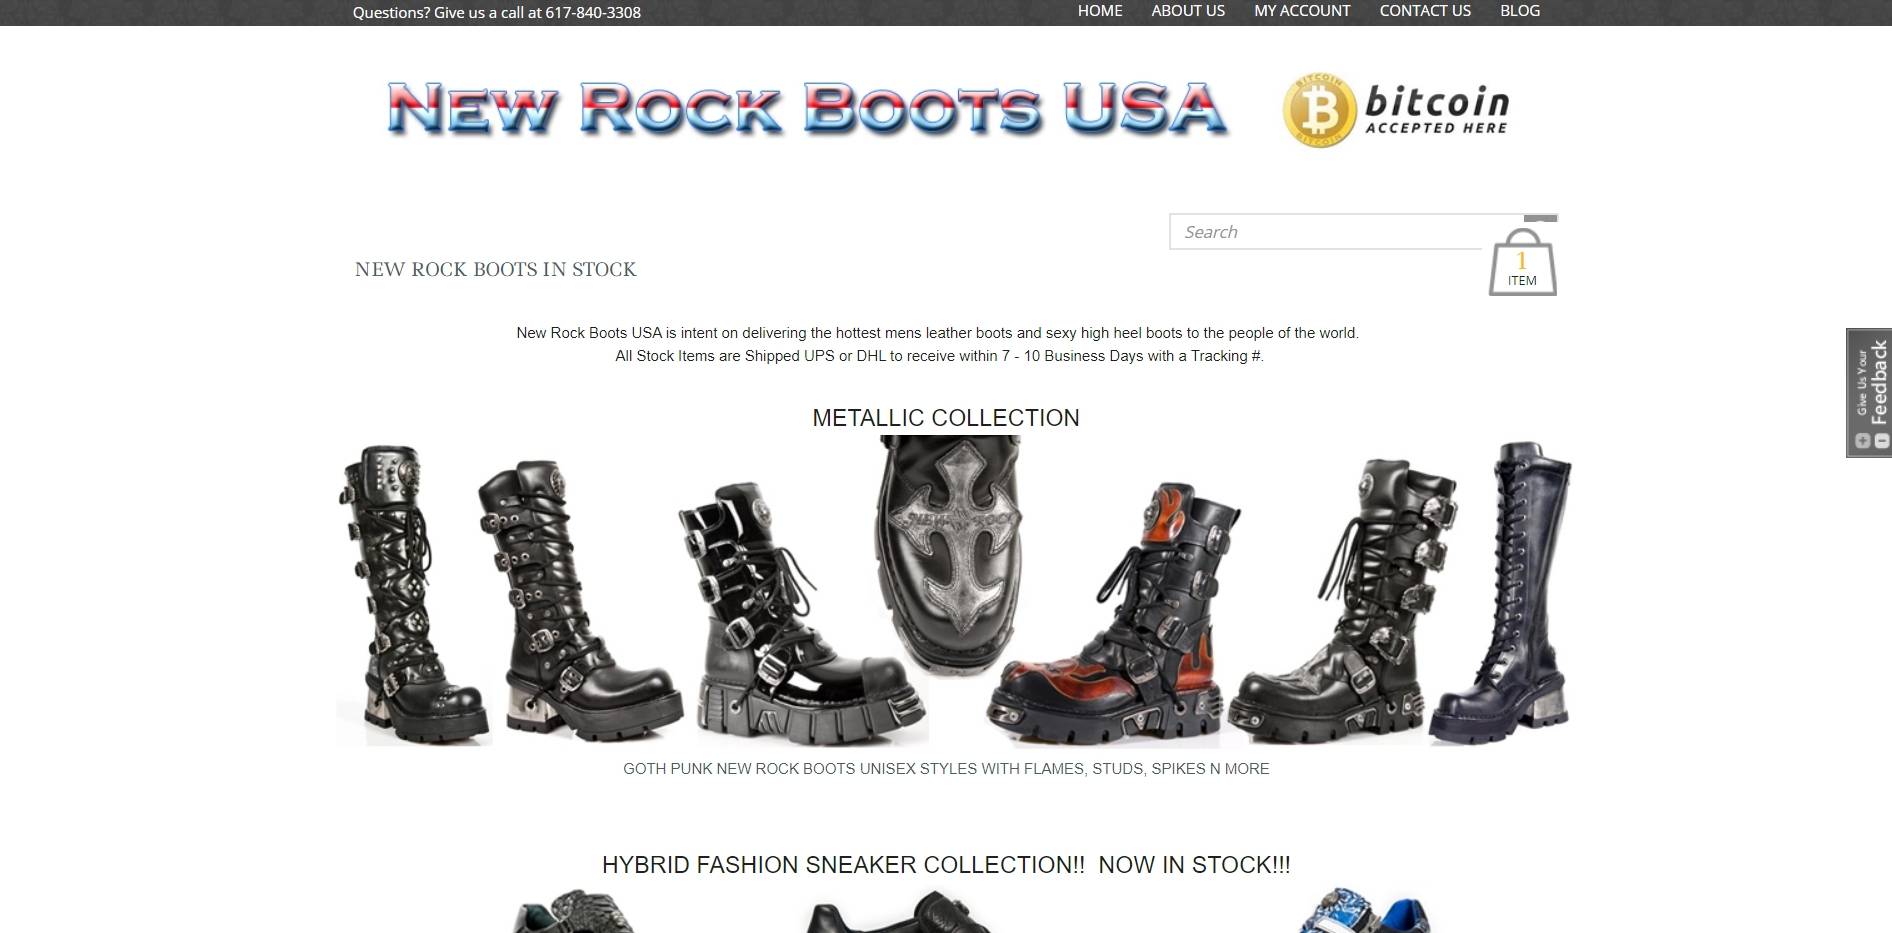 New Rock Boots USA